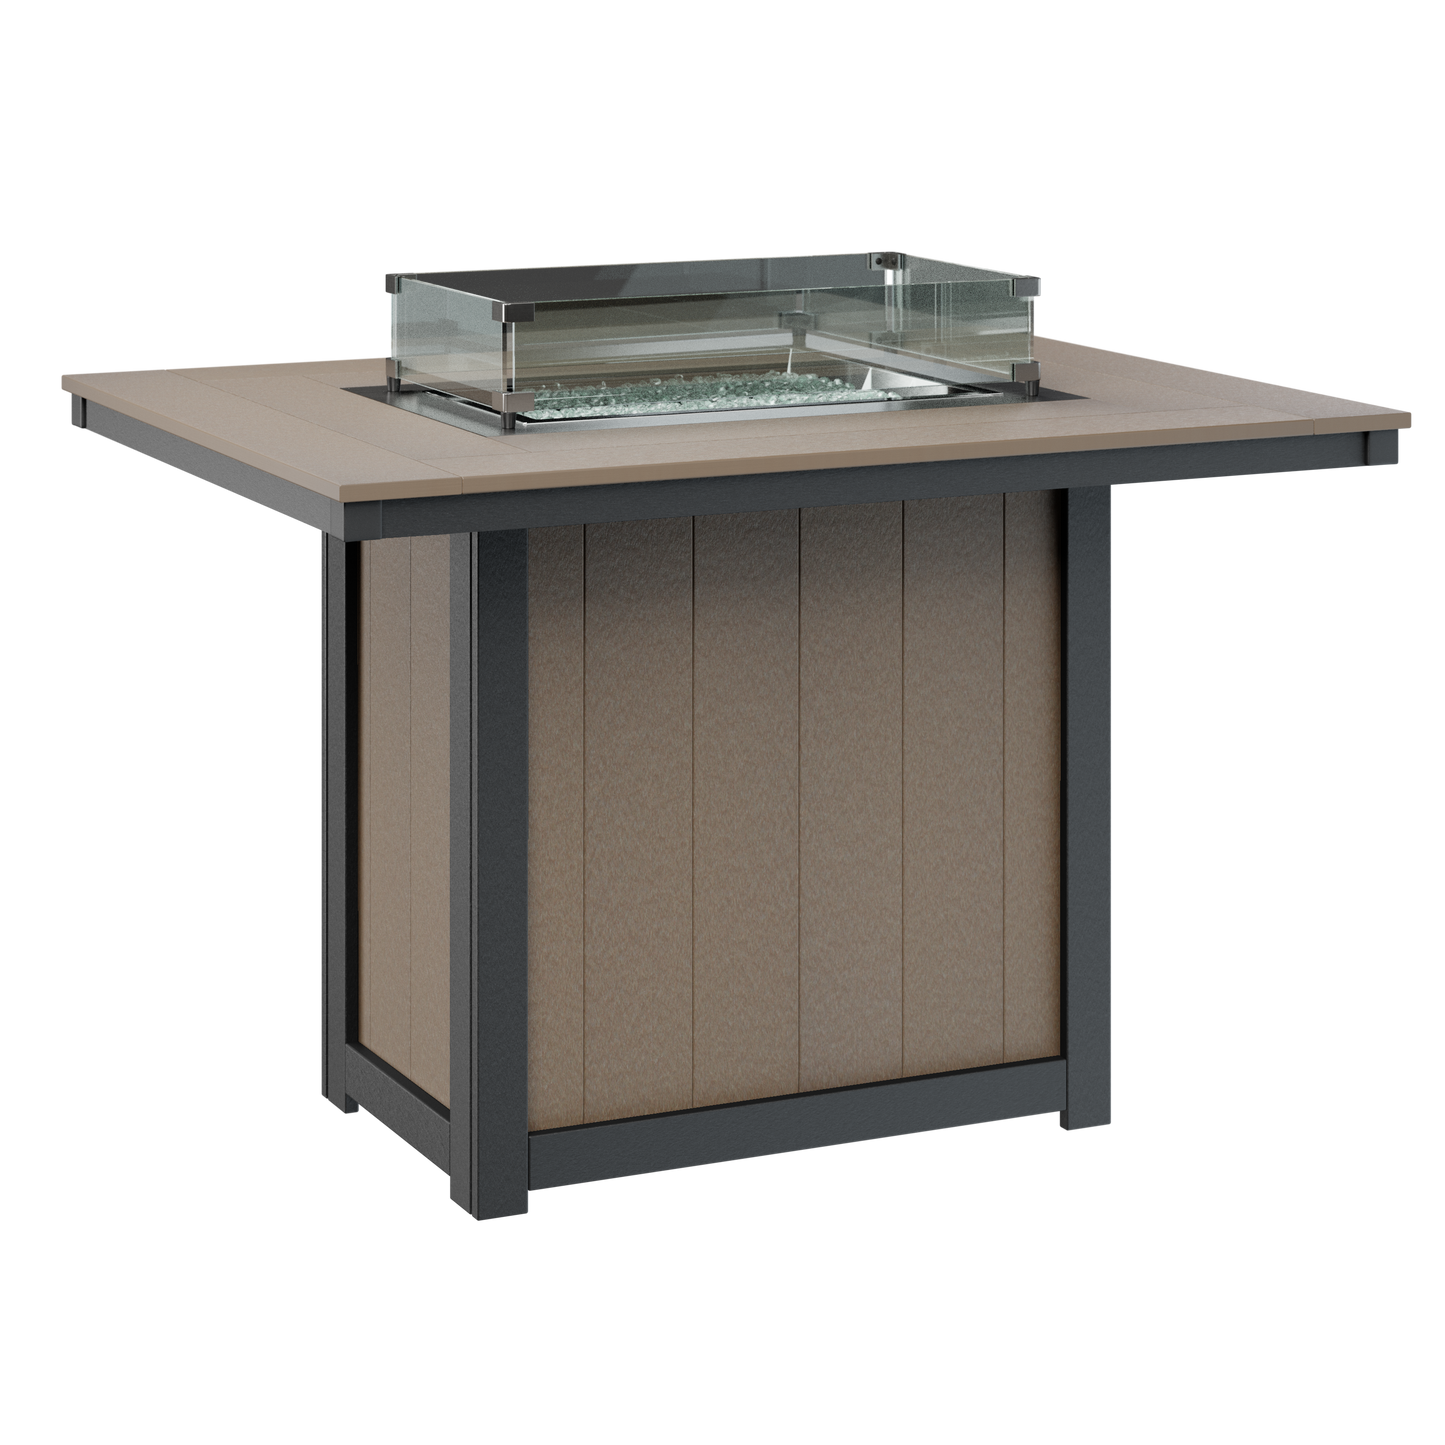 Donoma Rectangular Counter Height Fire Table